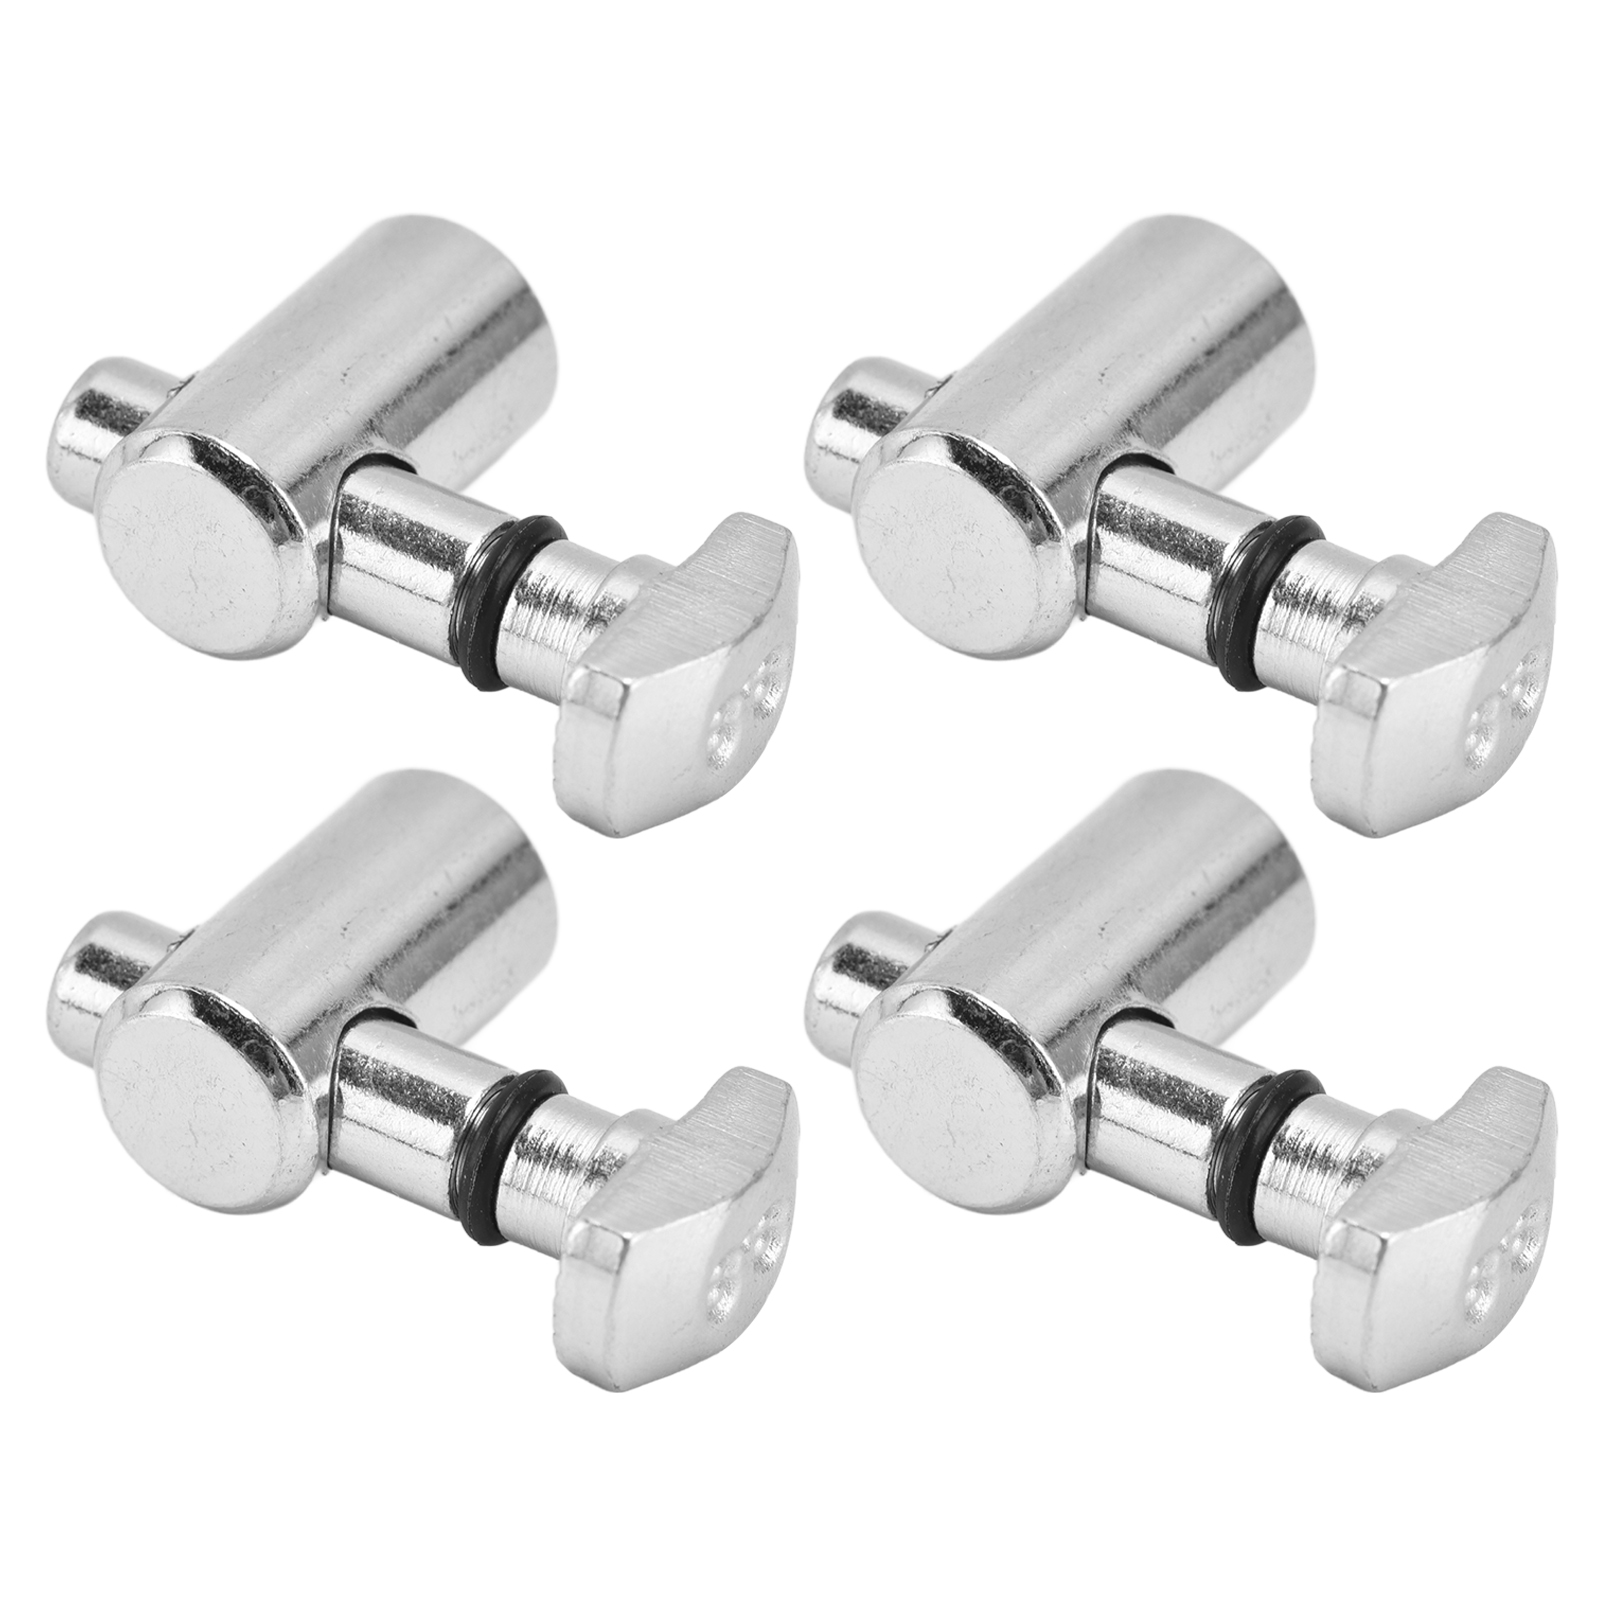 Anchor Type Connector, 4Pcs Tight Seamless Connections Slot Connectors For  Walmart Canada